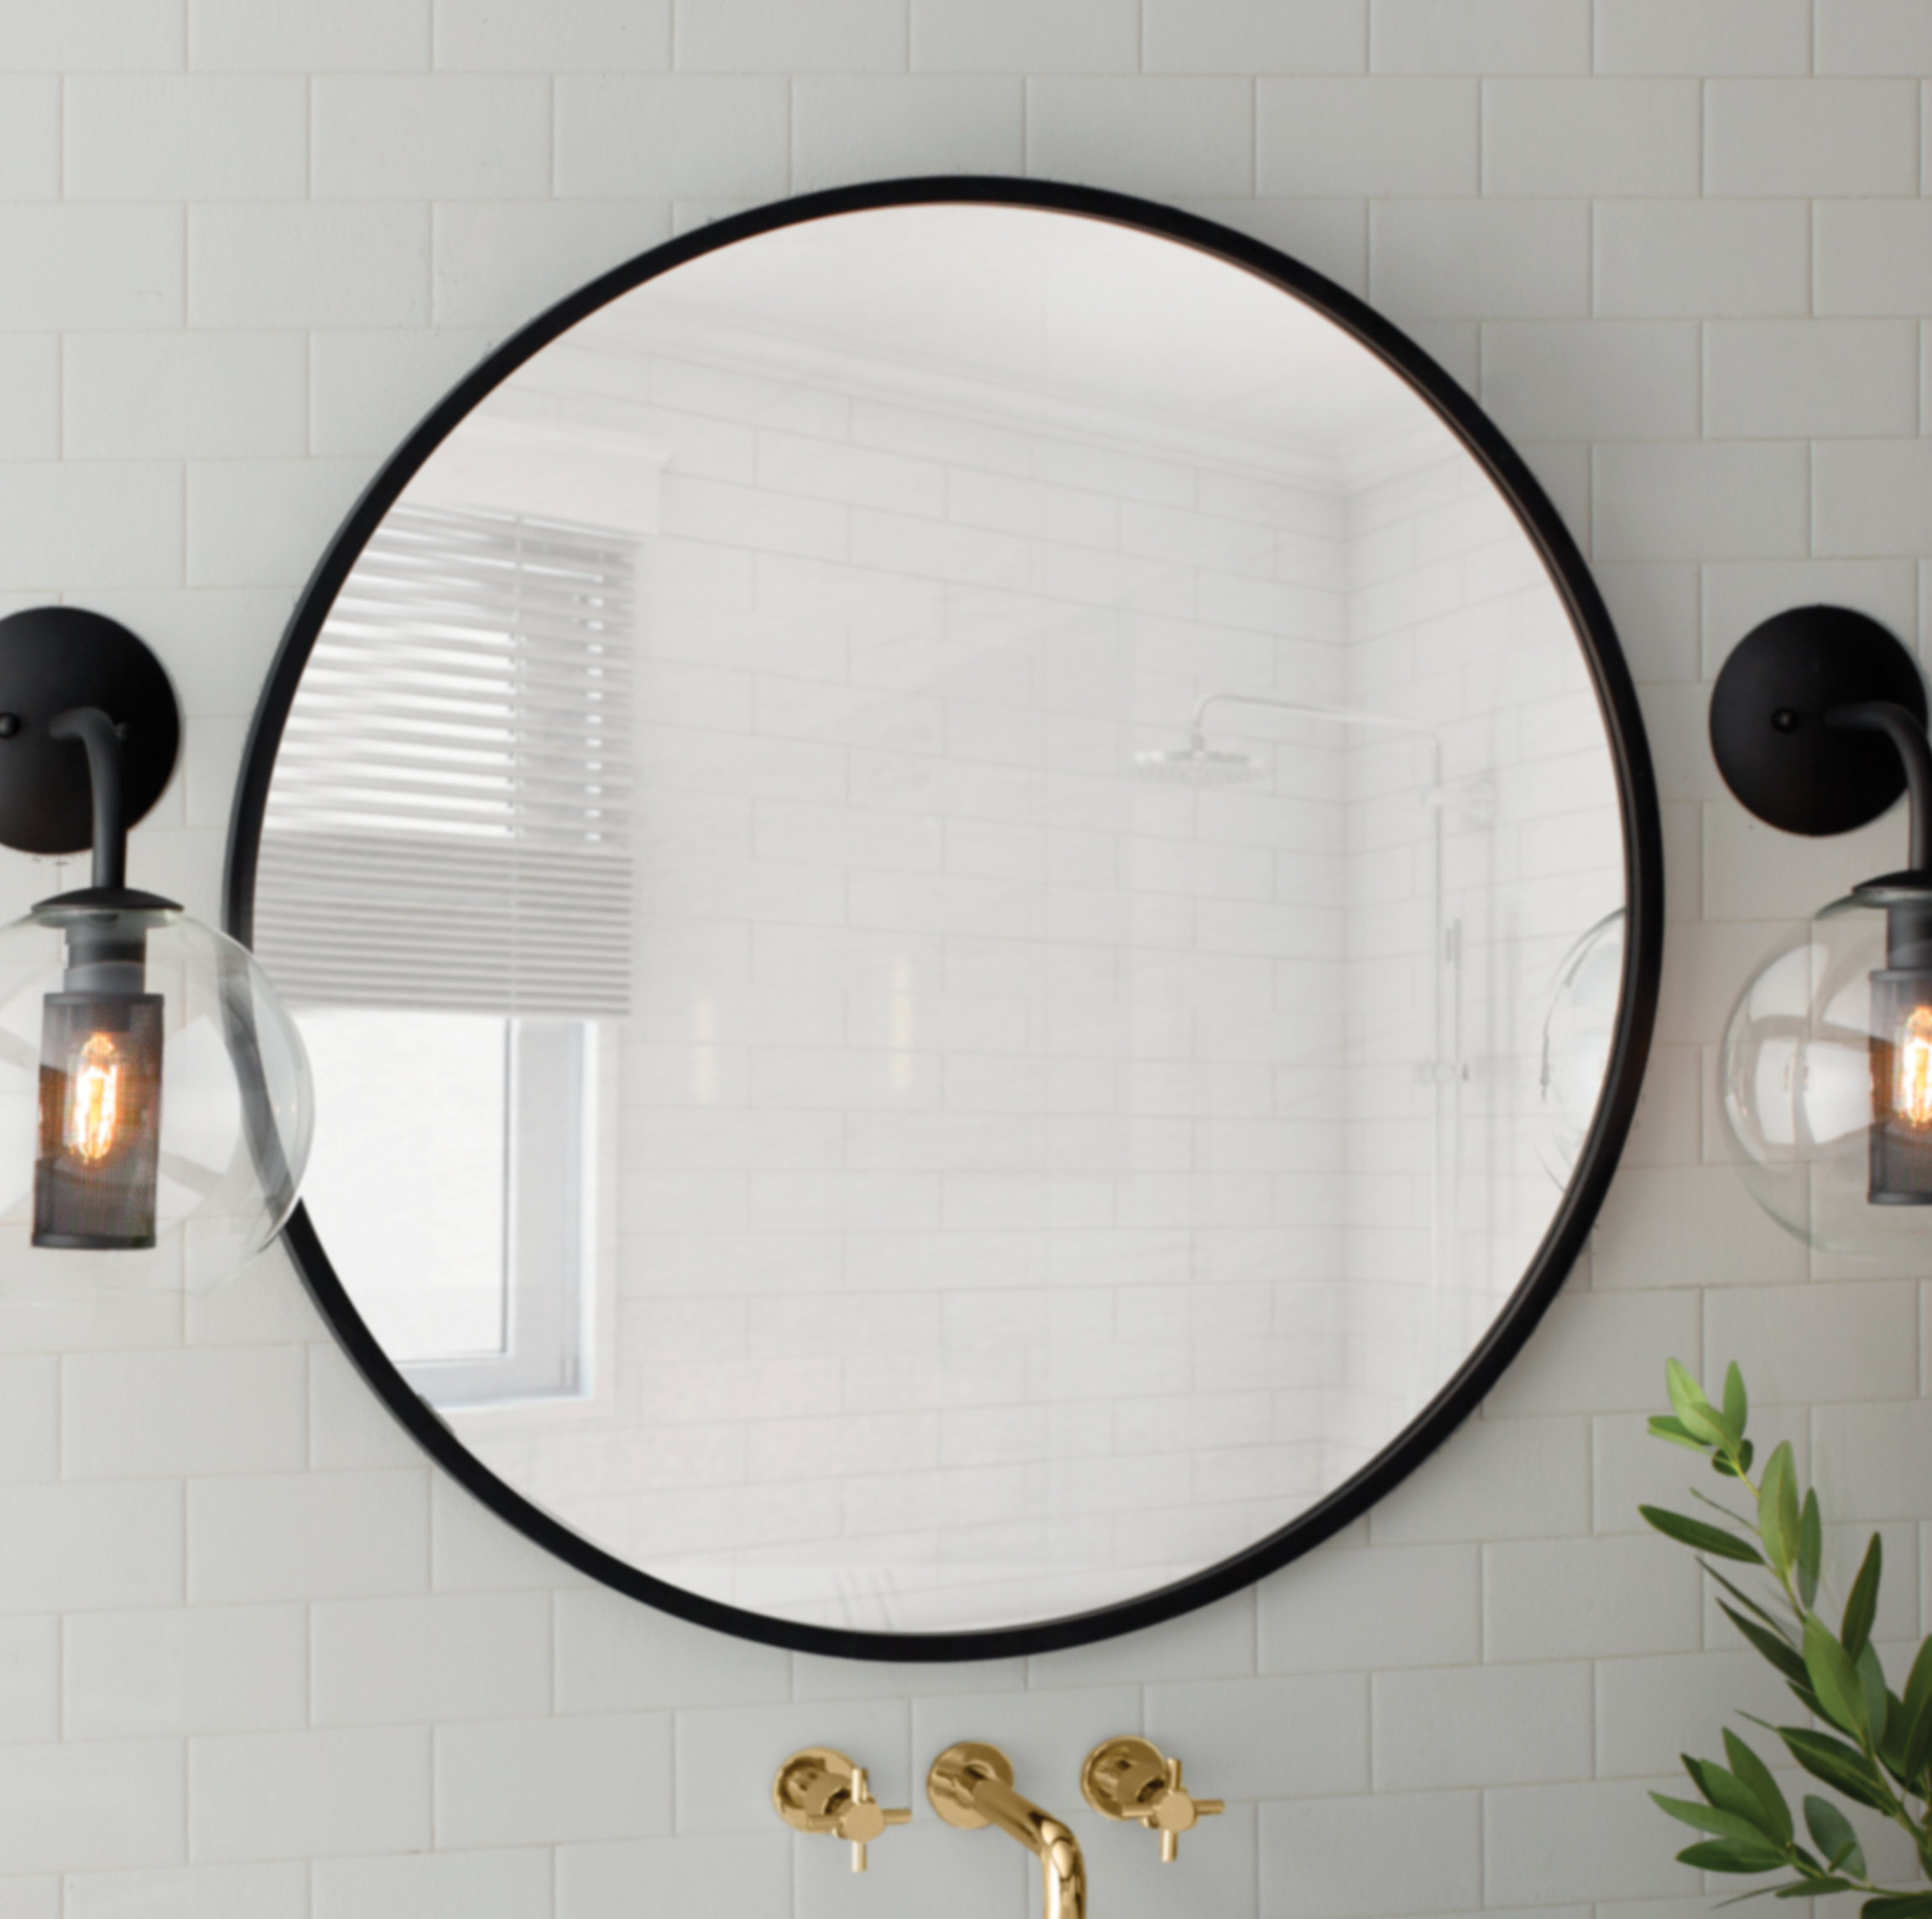 Featured image of post Black Round Bathroom Mirror With Light / Makeup mirror with light bulbs, background.